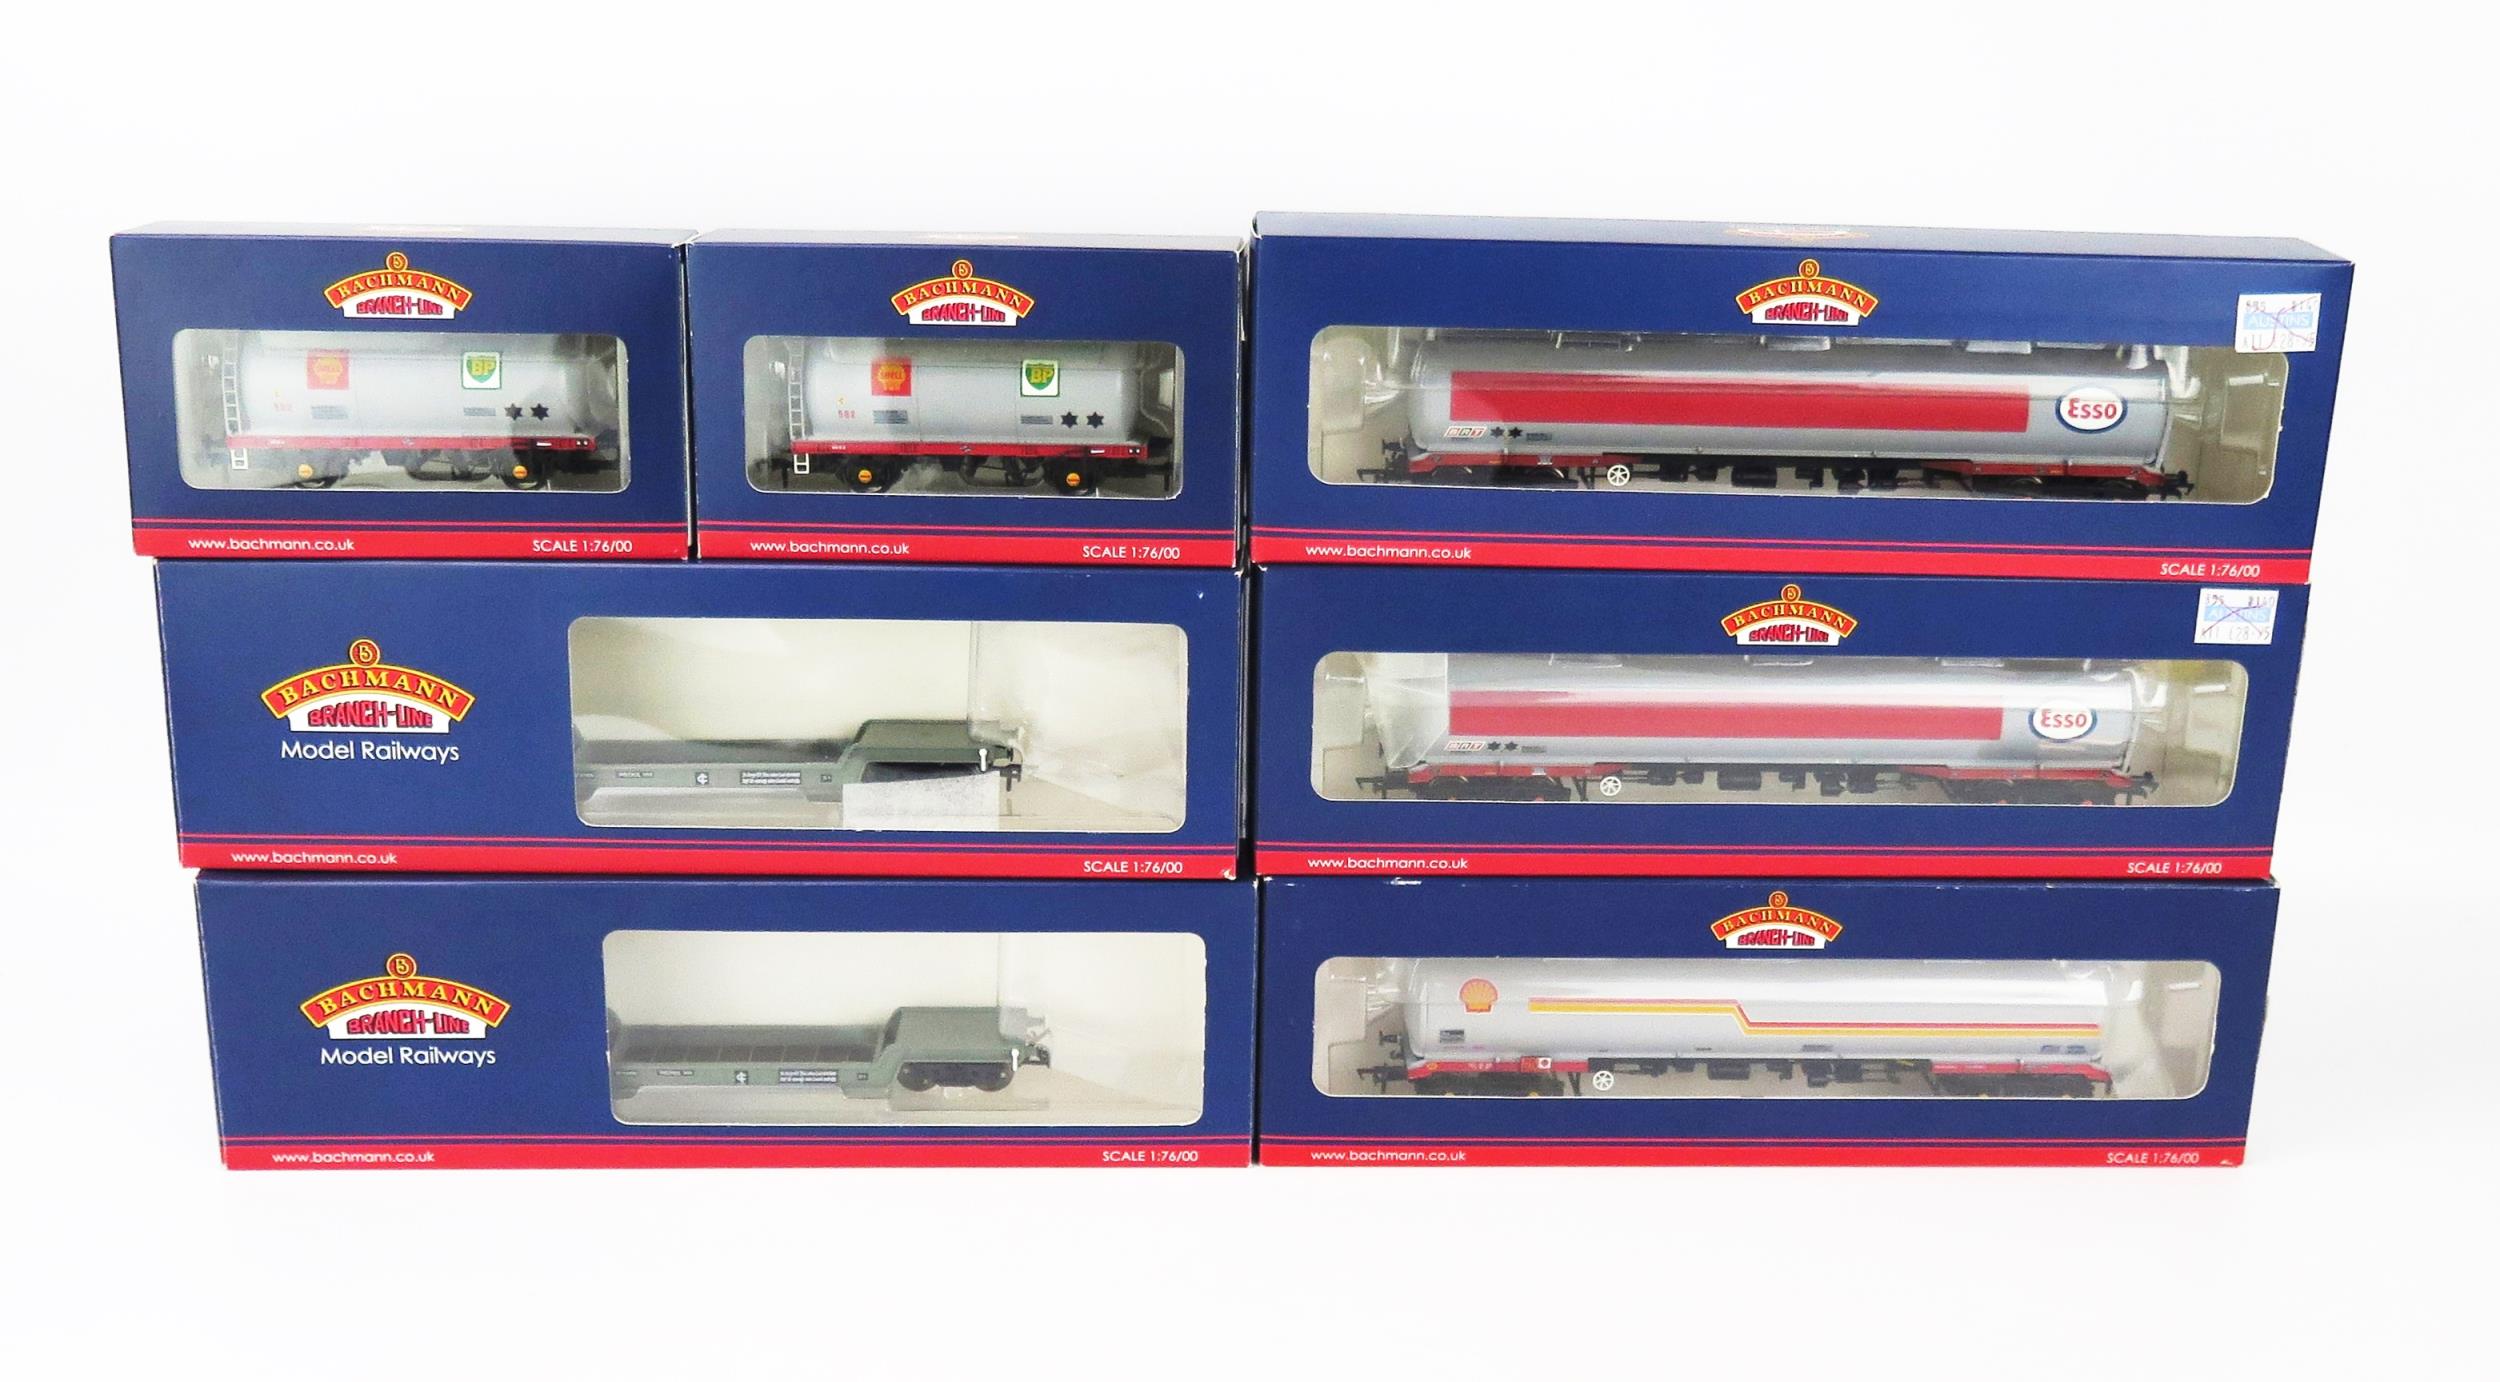 Bachmann OO Gauge Tank Wagons and Well Wagons including 38-110A "Shell", x2 38-113A "Esso", x2 37-